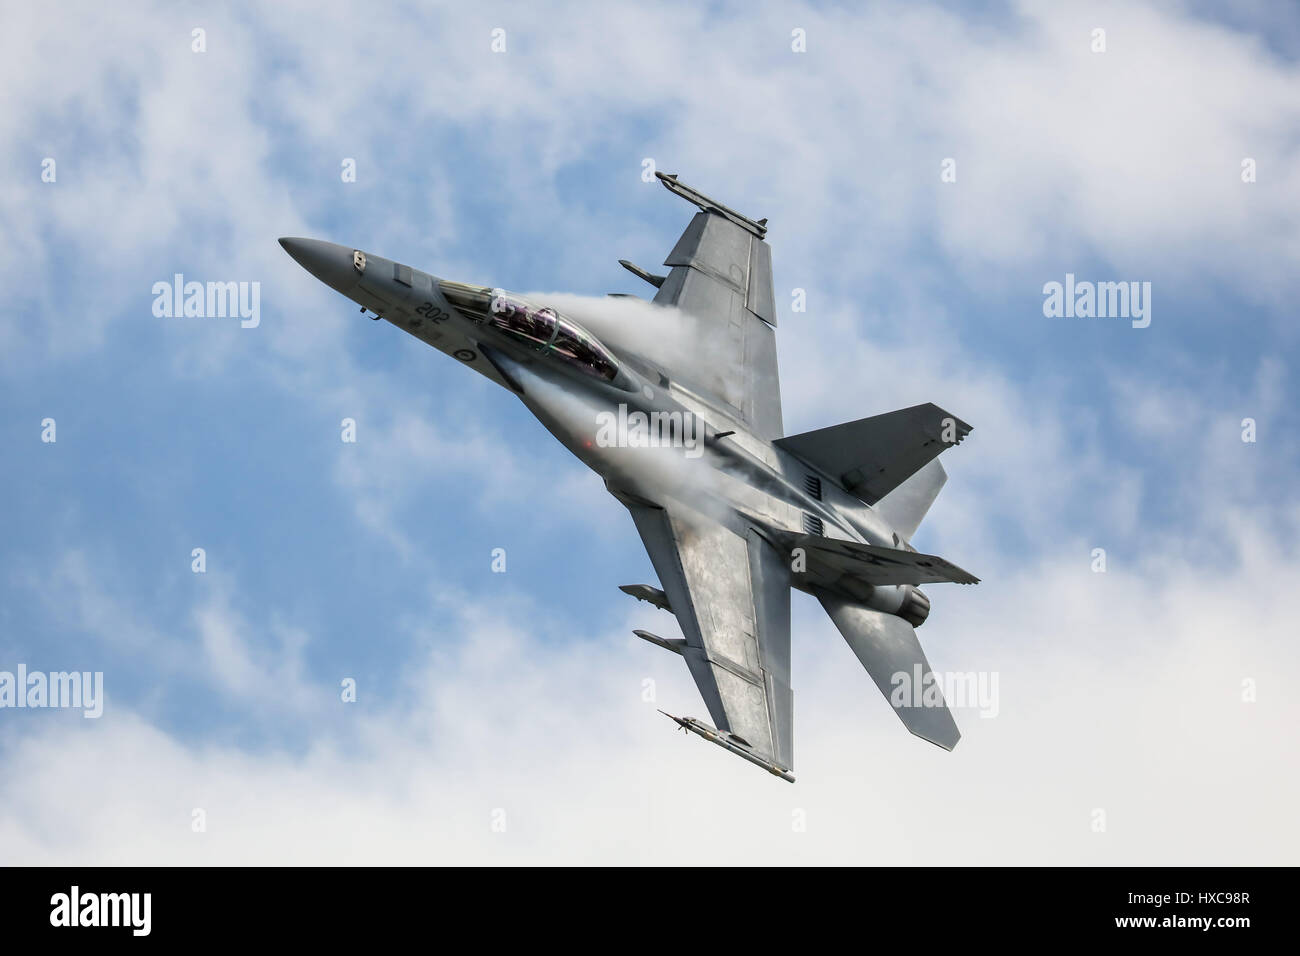 MELBOURNE, AUSTRALIA - MARCH 25: An Royal Australian Air Force FAA18F Super Hornet performs in a public display above Melbourne on March 25, 2017 Stock Photo